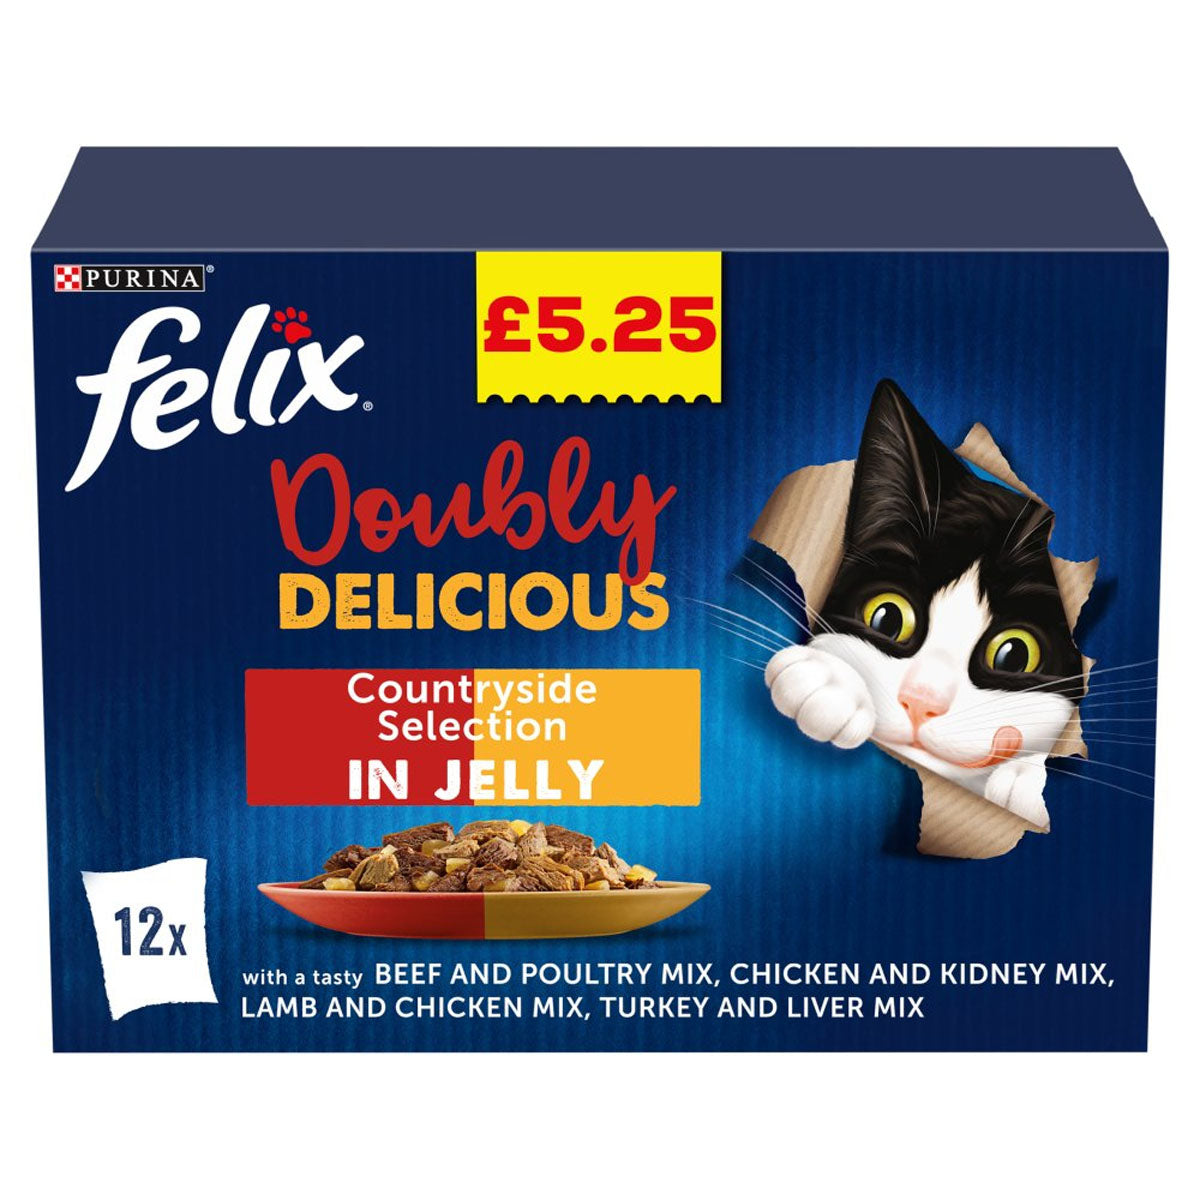 Felix - Doubly Delicious Countryside Selection in Jelly - 12 x 100g is a very delicious cat food.